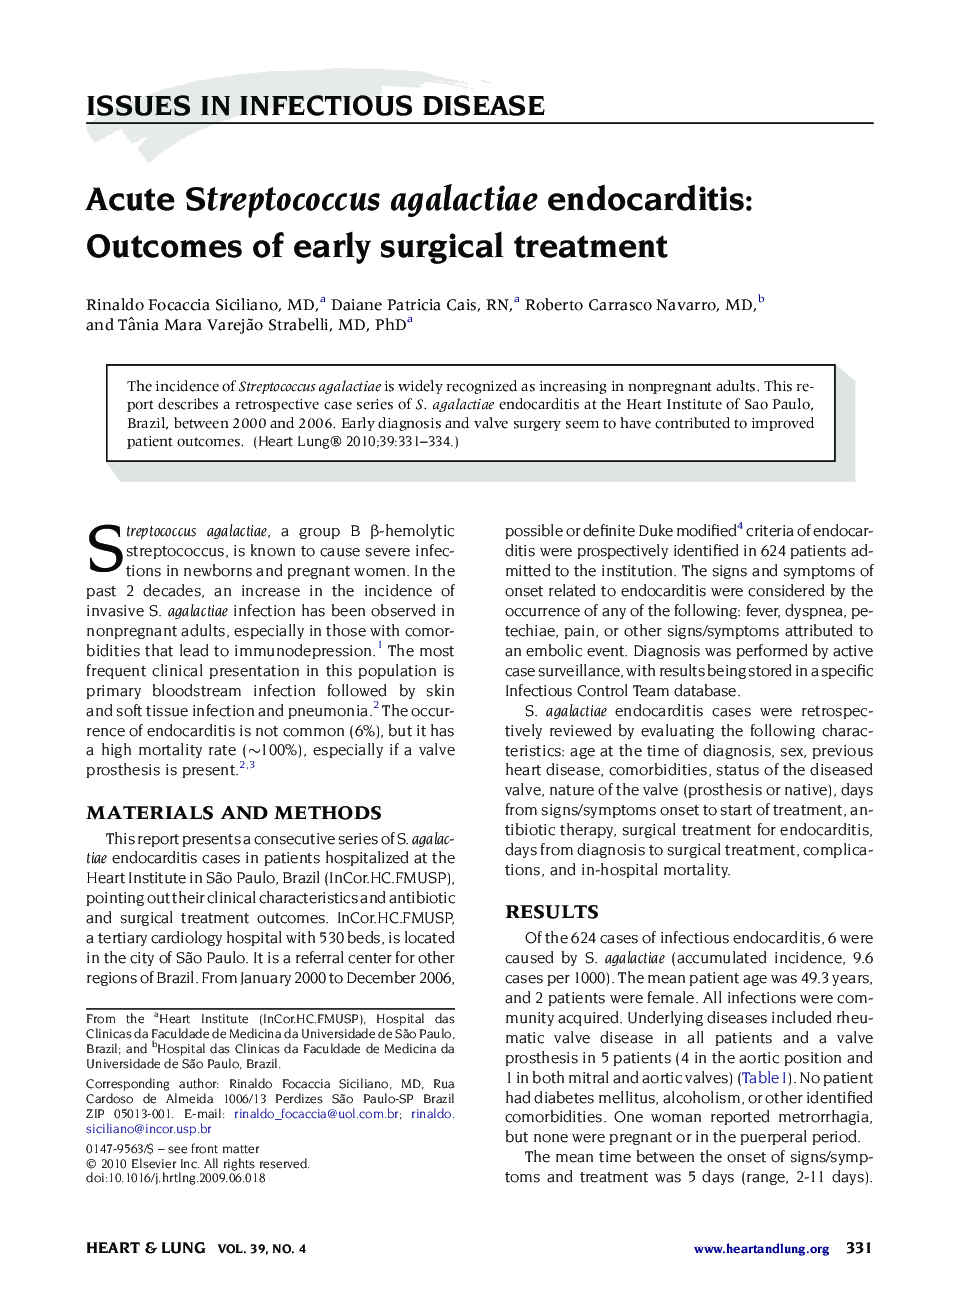 Acute Streptococcus agalactiae endocarditis: Outcomes of early surgical treatment